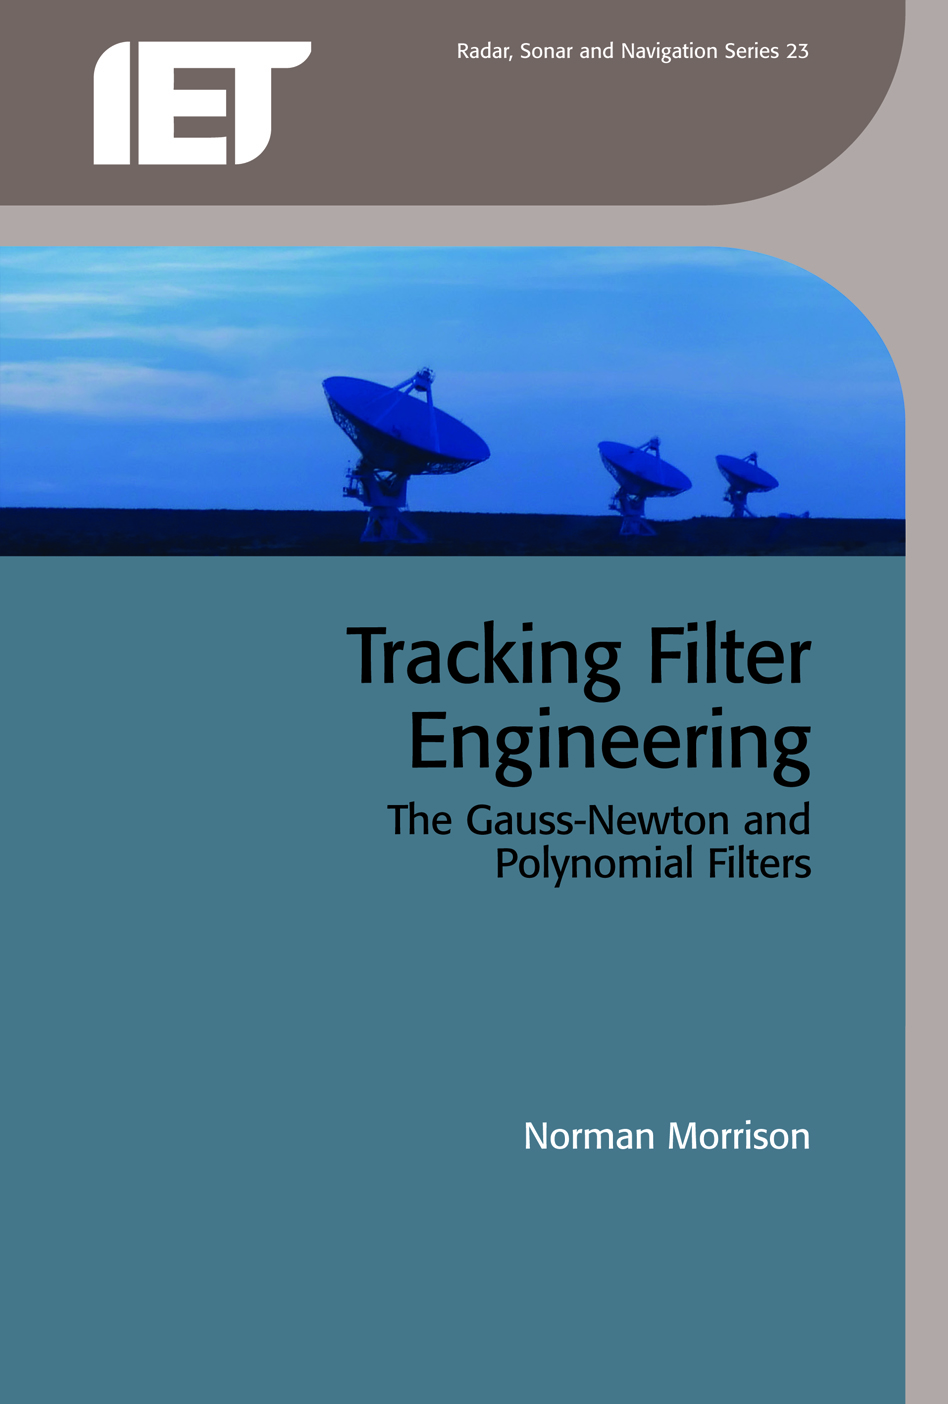 Tracking Filter Engineering, The Gauss-Newton and polynomial filters